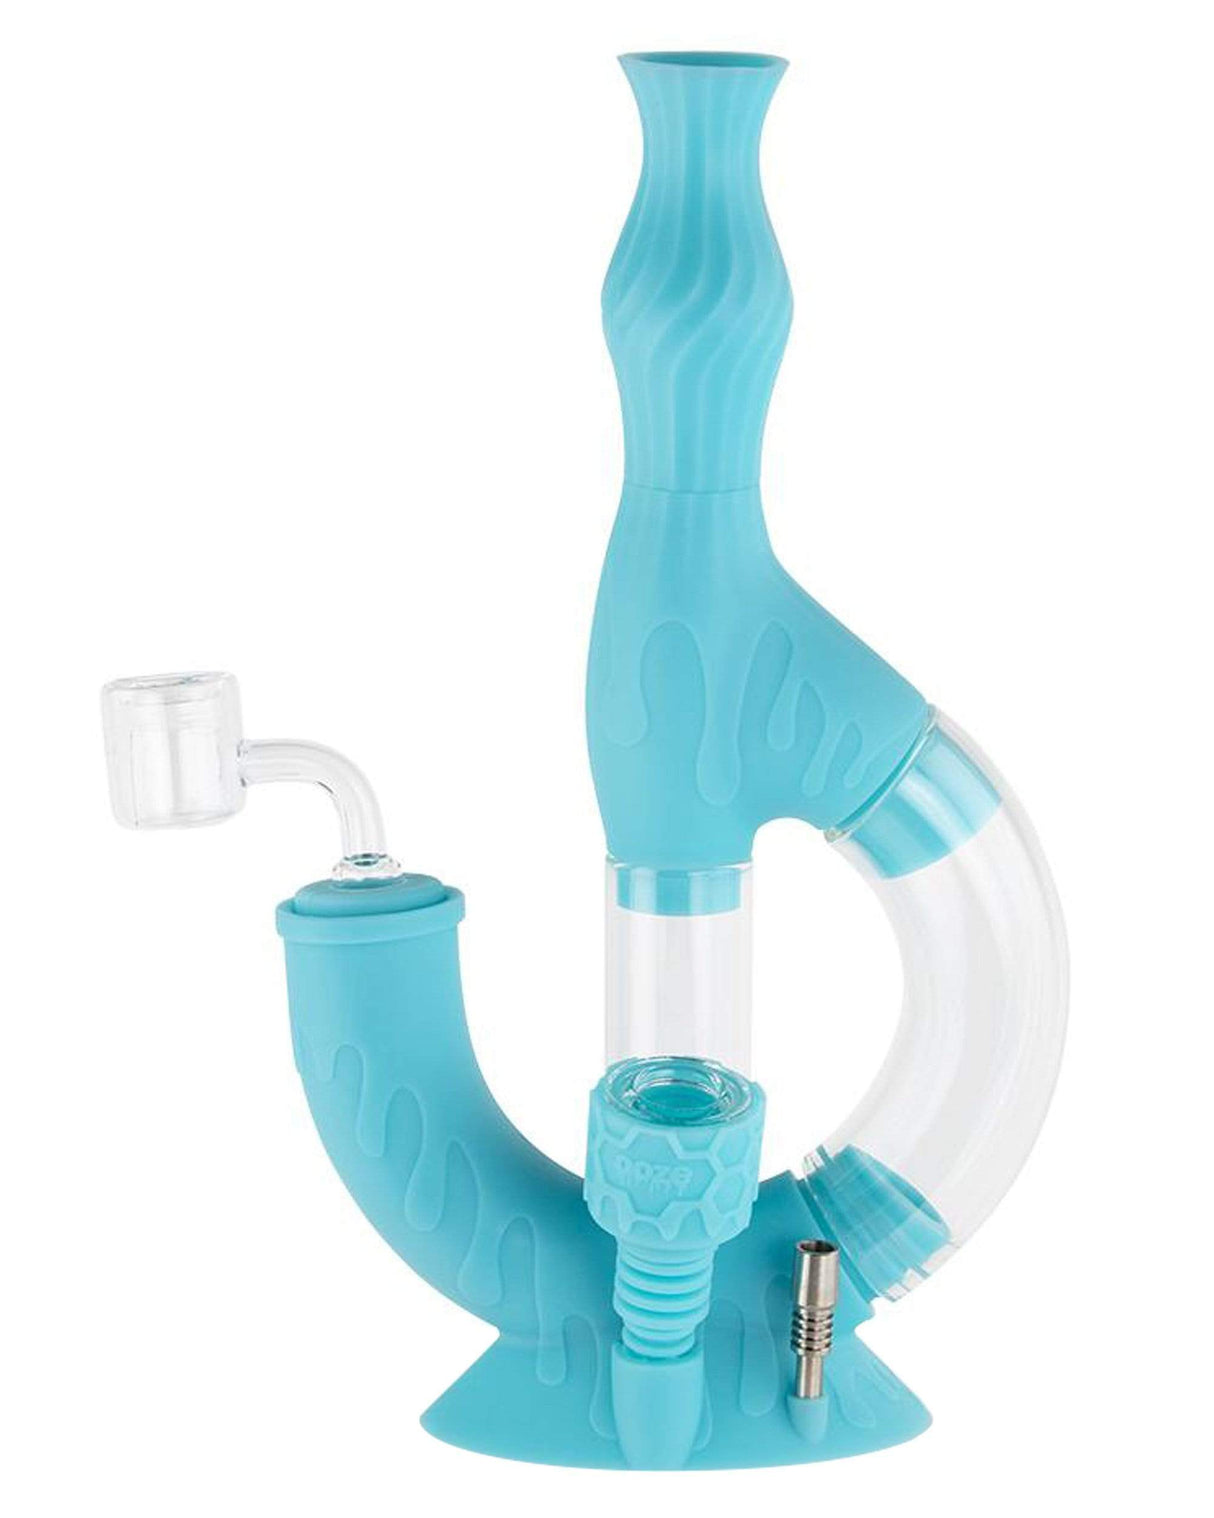 Ooze Echo 4-in-1 Silicone Bong in Teal, 9" with Slitted Percolator, Front View on White